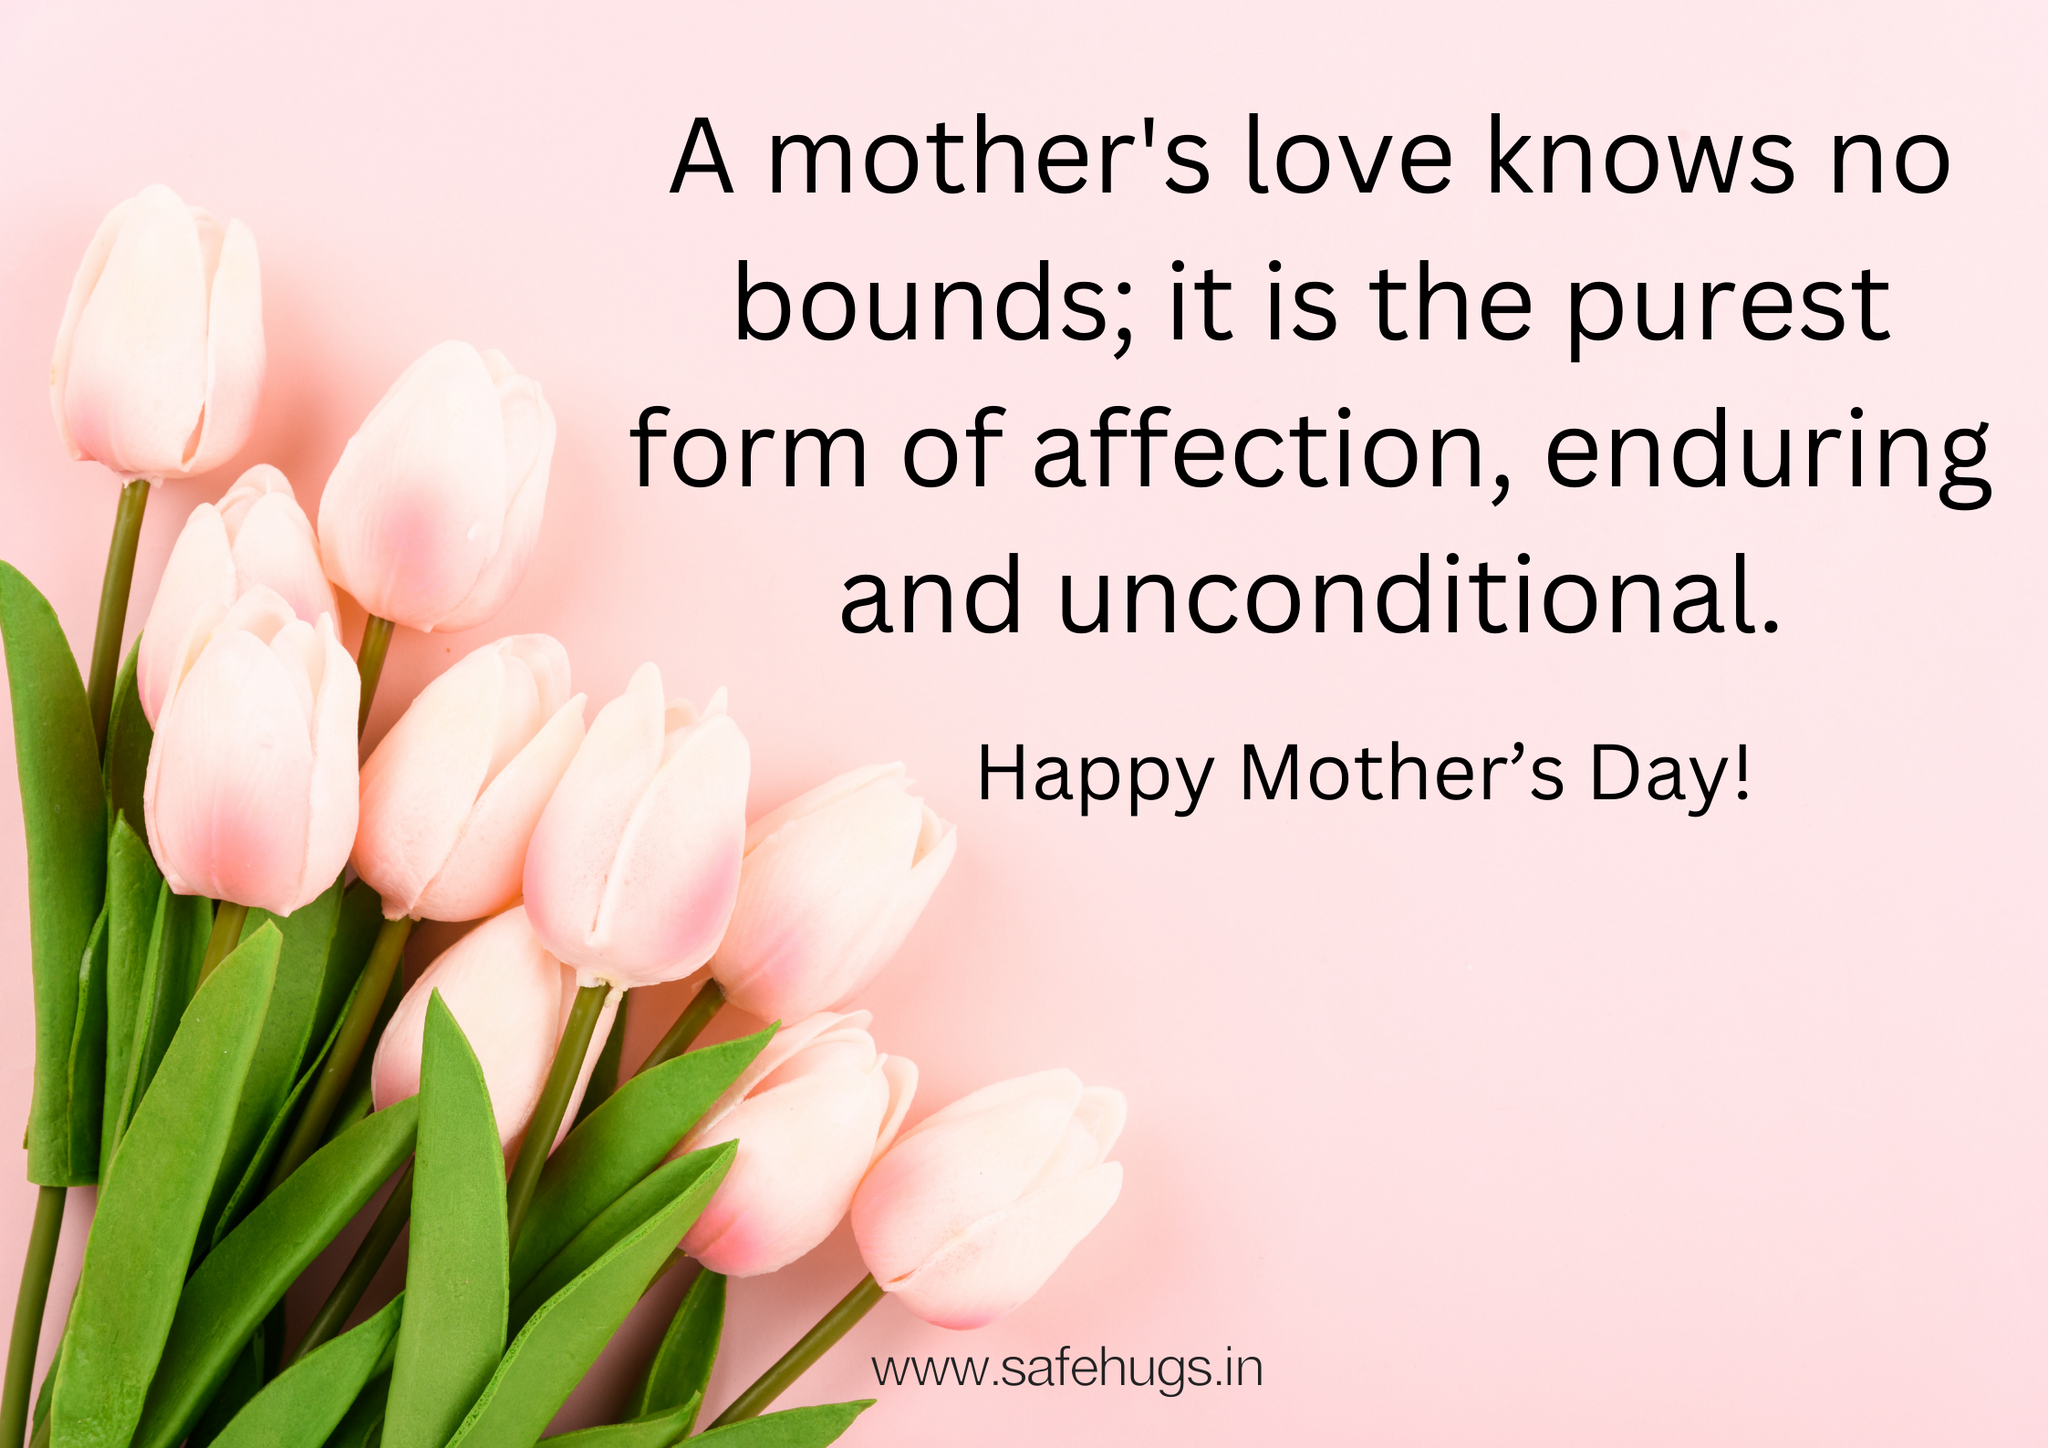 Quote: ' Mothers love knows no bounds.'